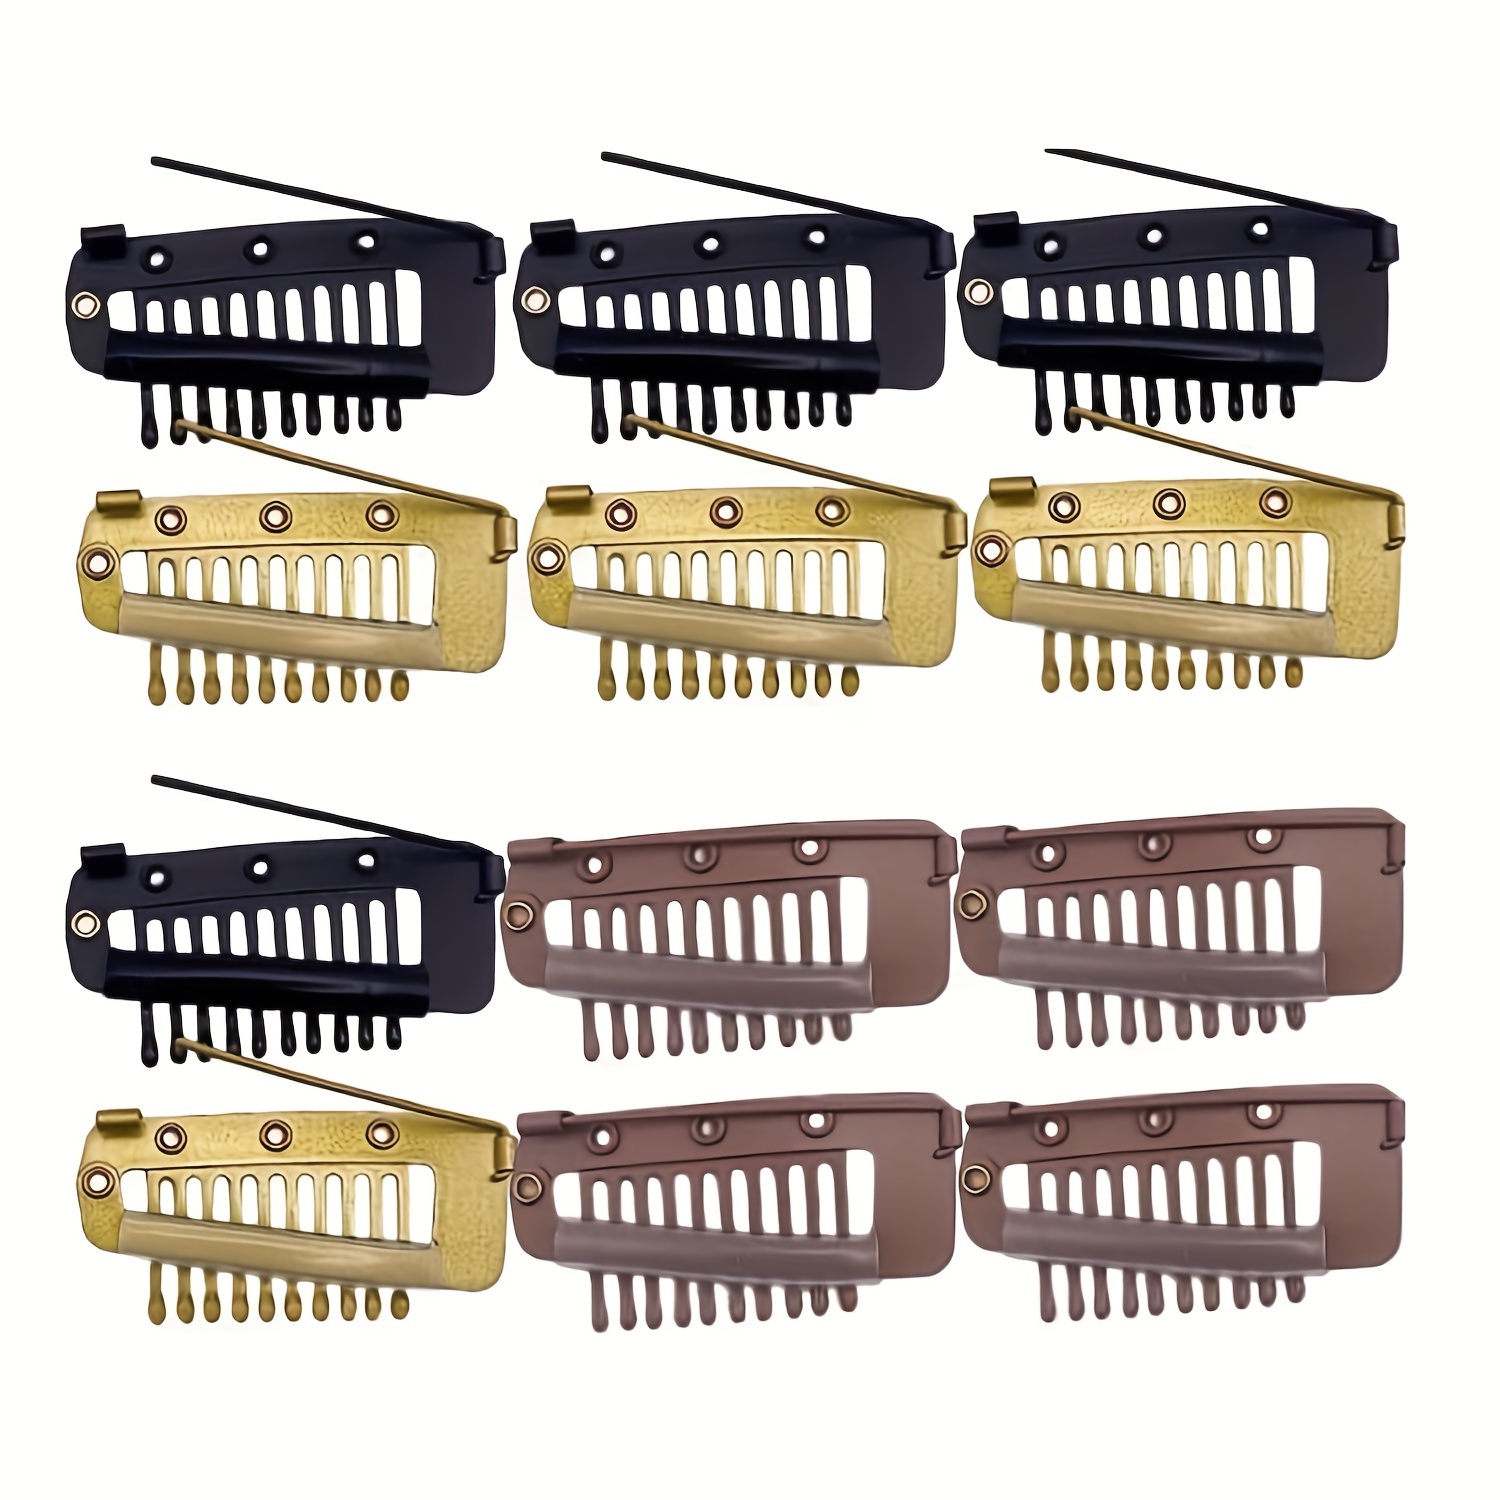 China Pack of 10 Strong Chunni Clips with Safety Pin, Easy to Use with Dupatta, Hijab & Tikka Setting Black, Women's, Size: 4